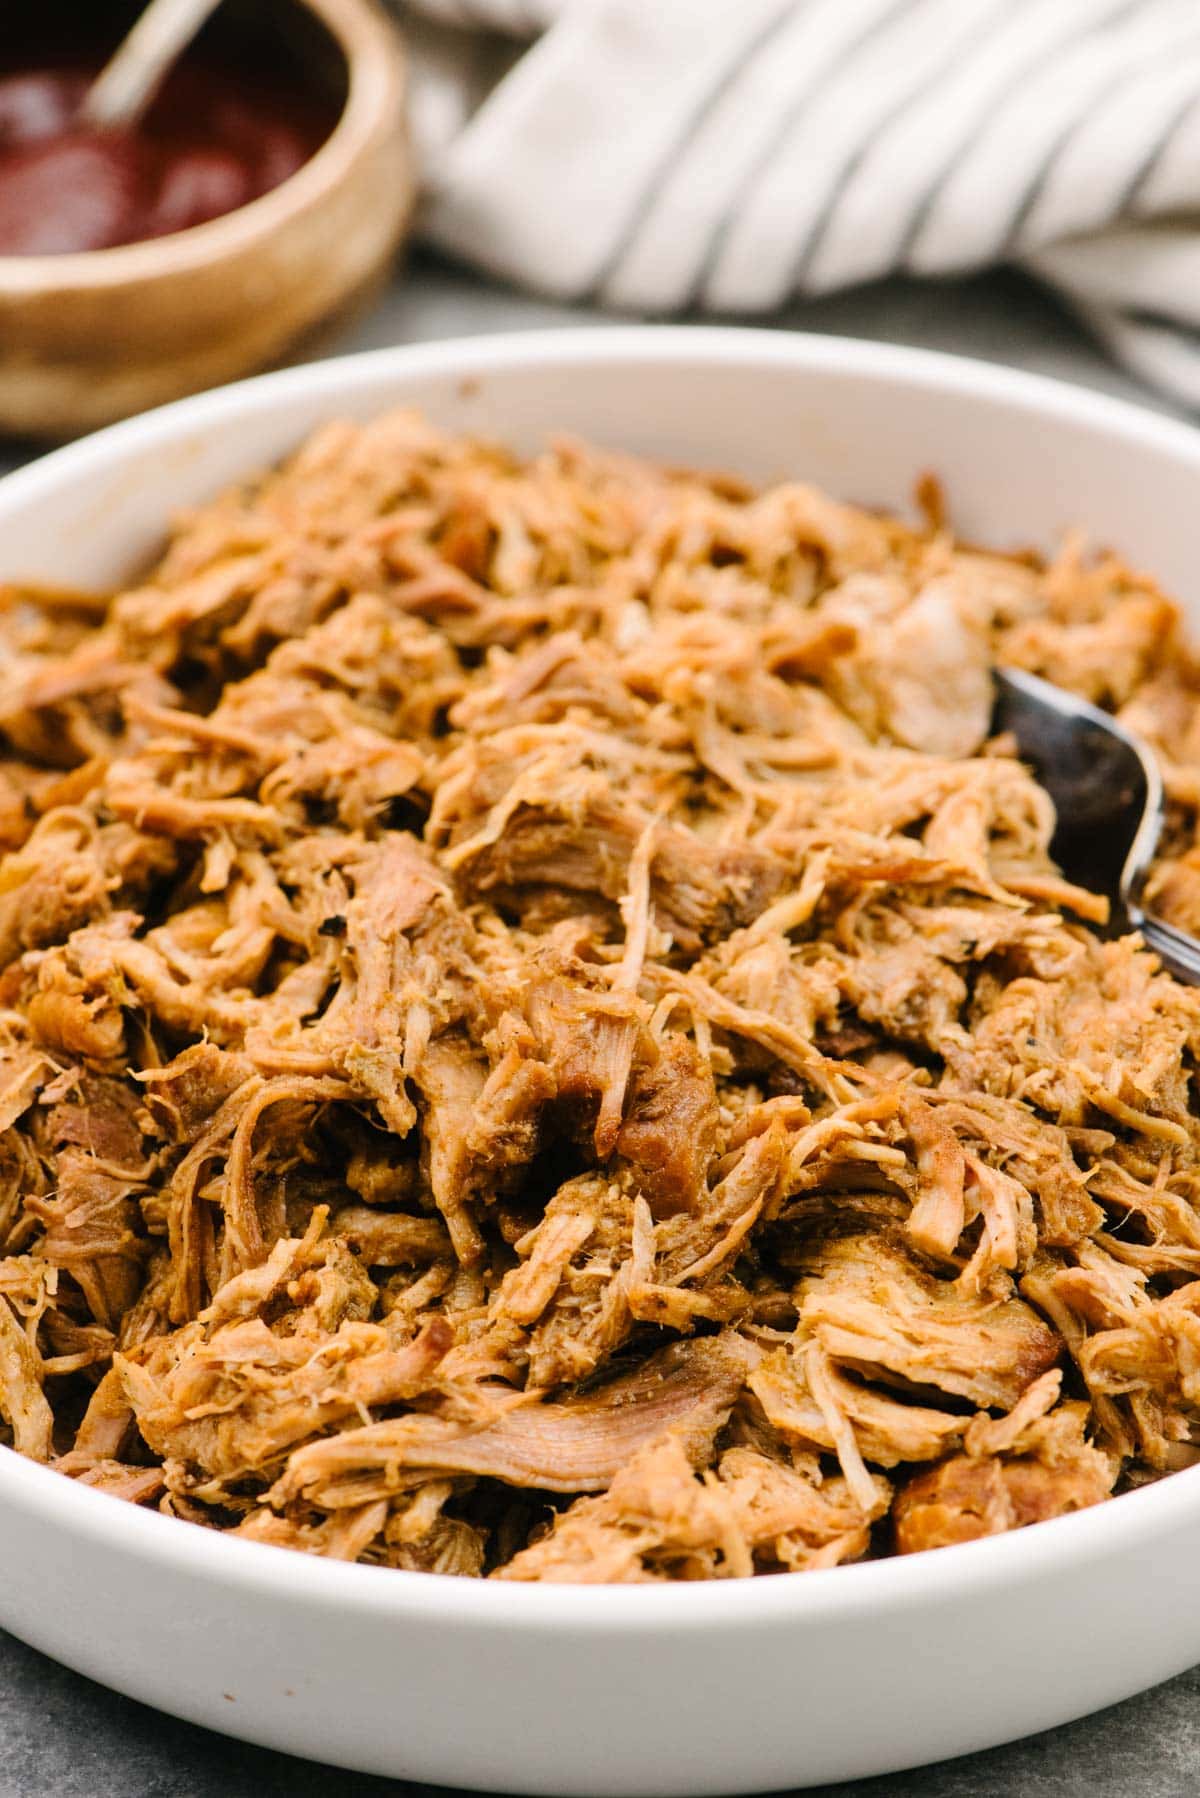 Side view, a serving fork tucked into a bowl of slow cooker pulled pork with a bowl of barbecue sauce and striped linen napkin the background.